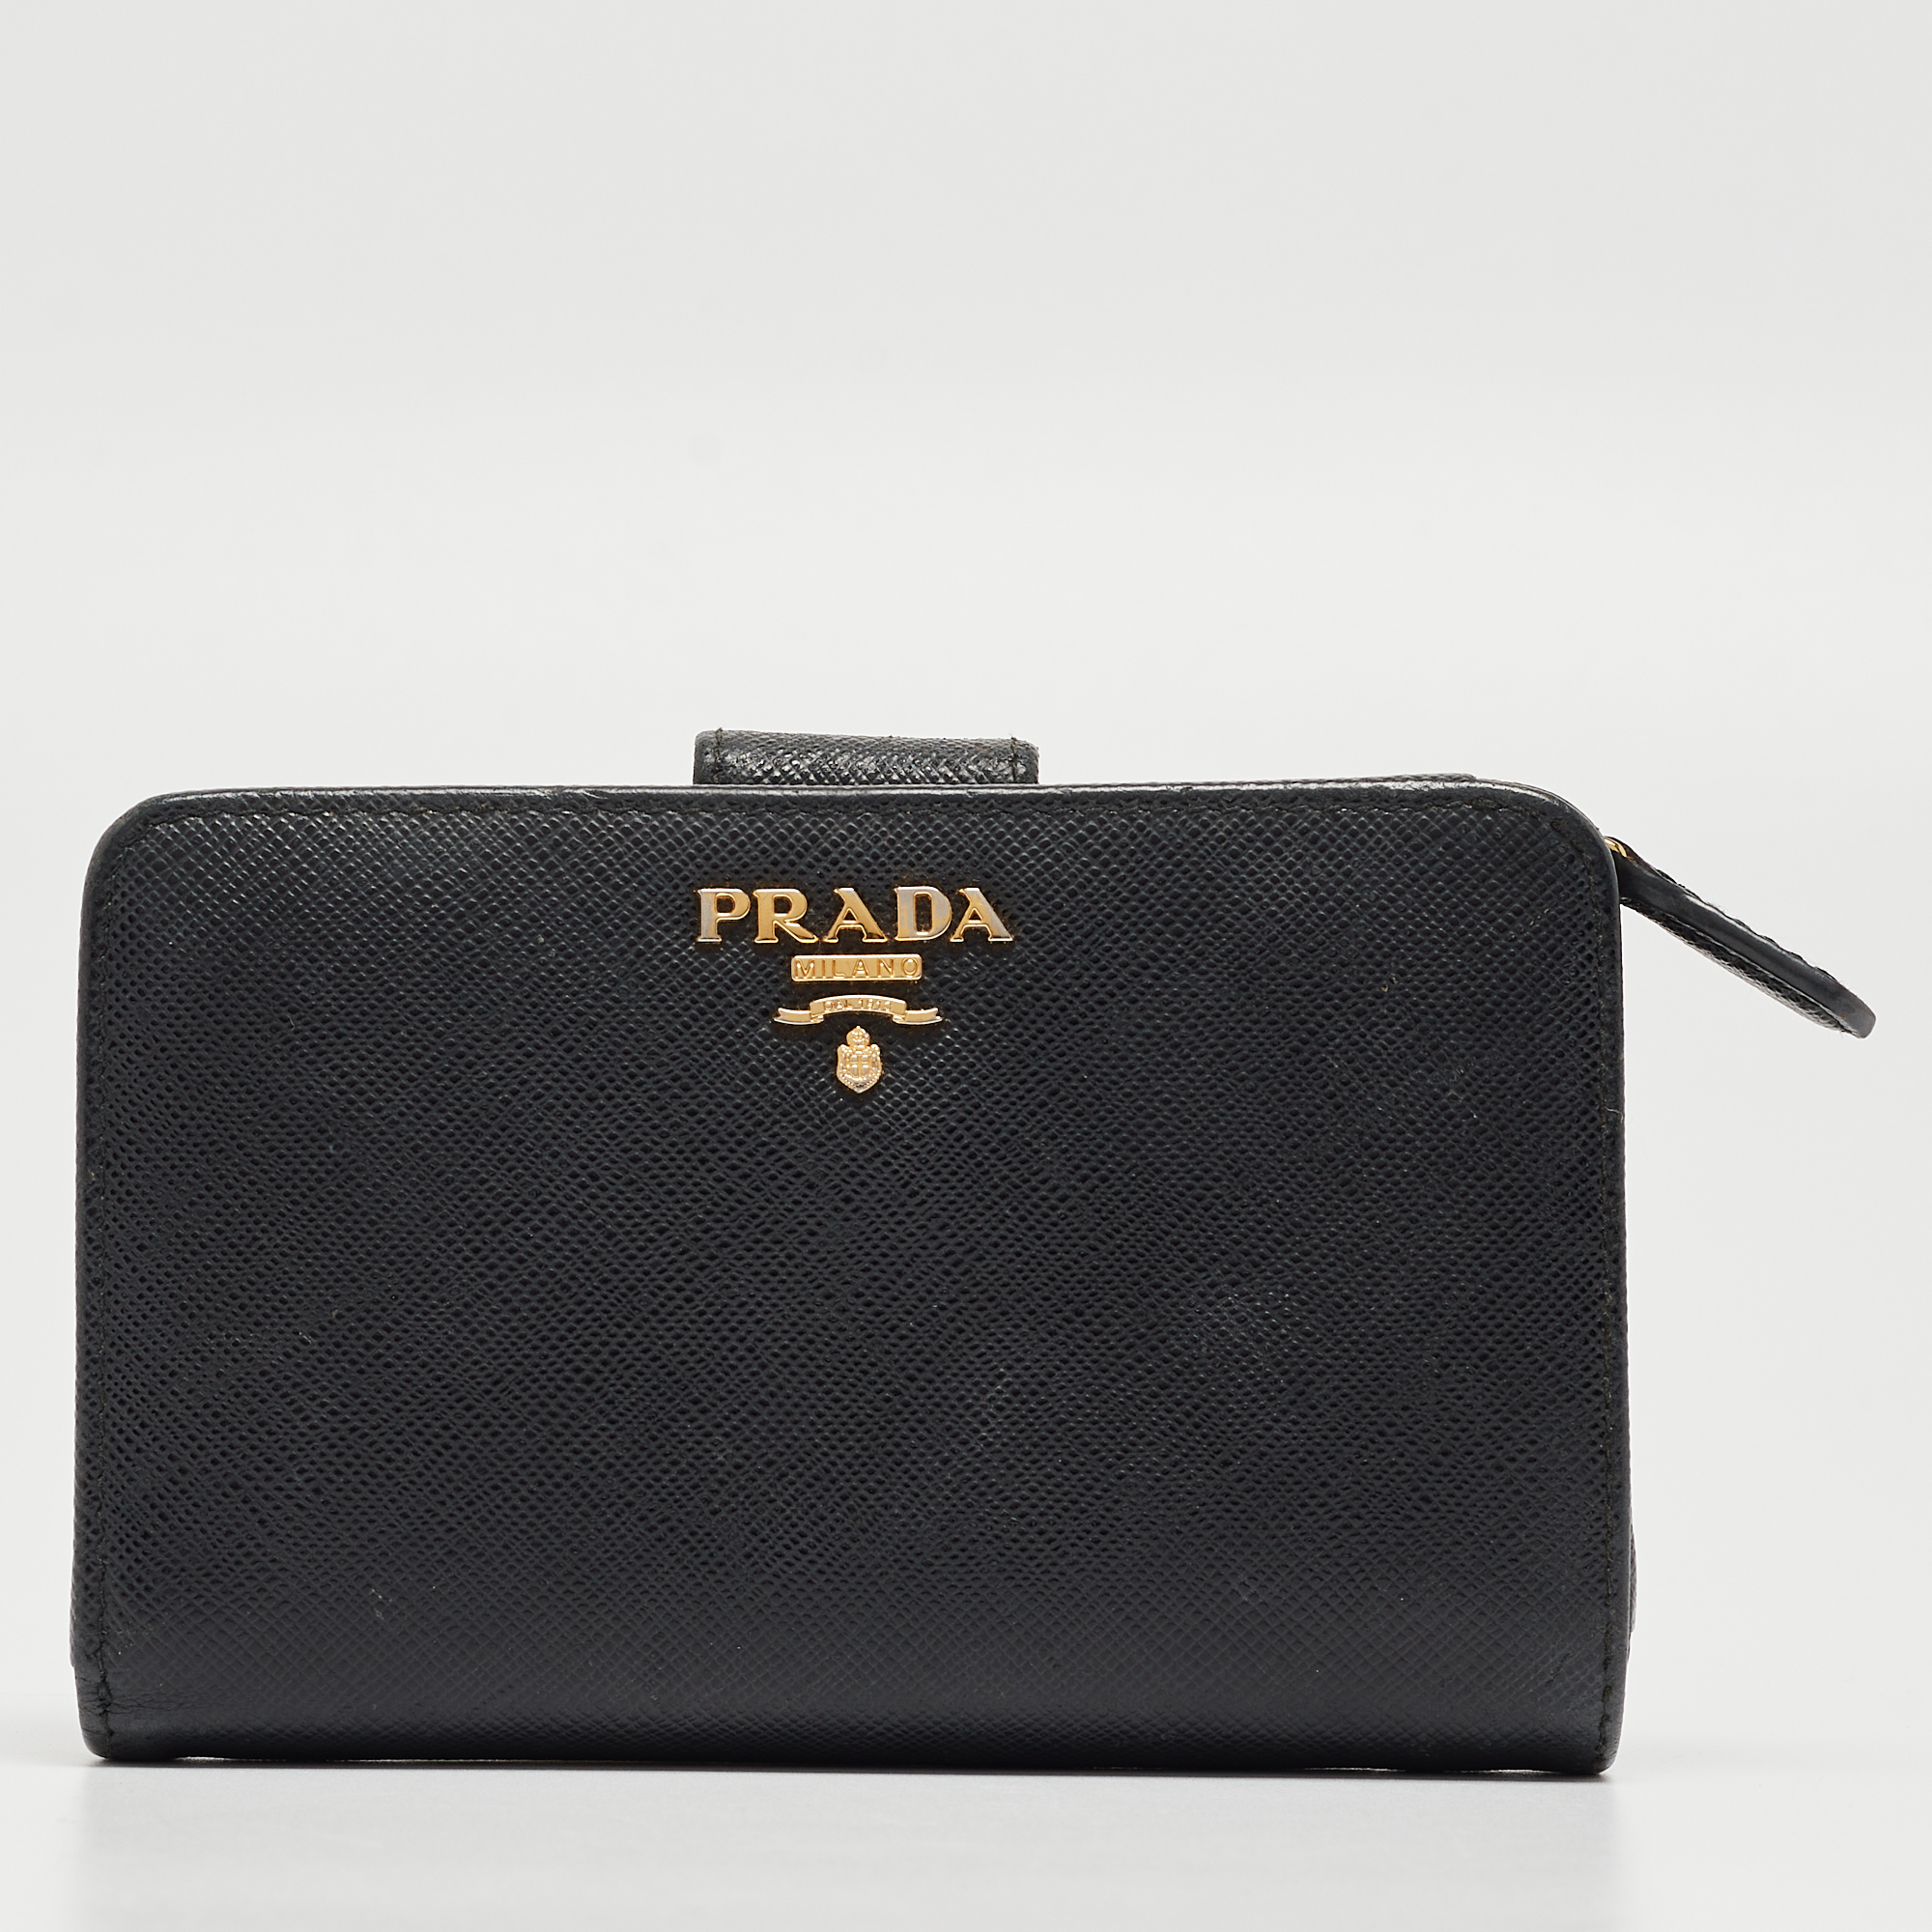 Pre-owned Prada Black Saffiano Leather Zip Around Compact Wallet